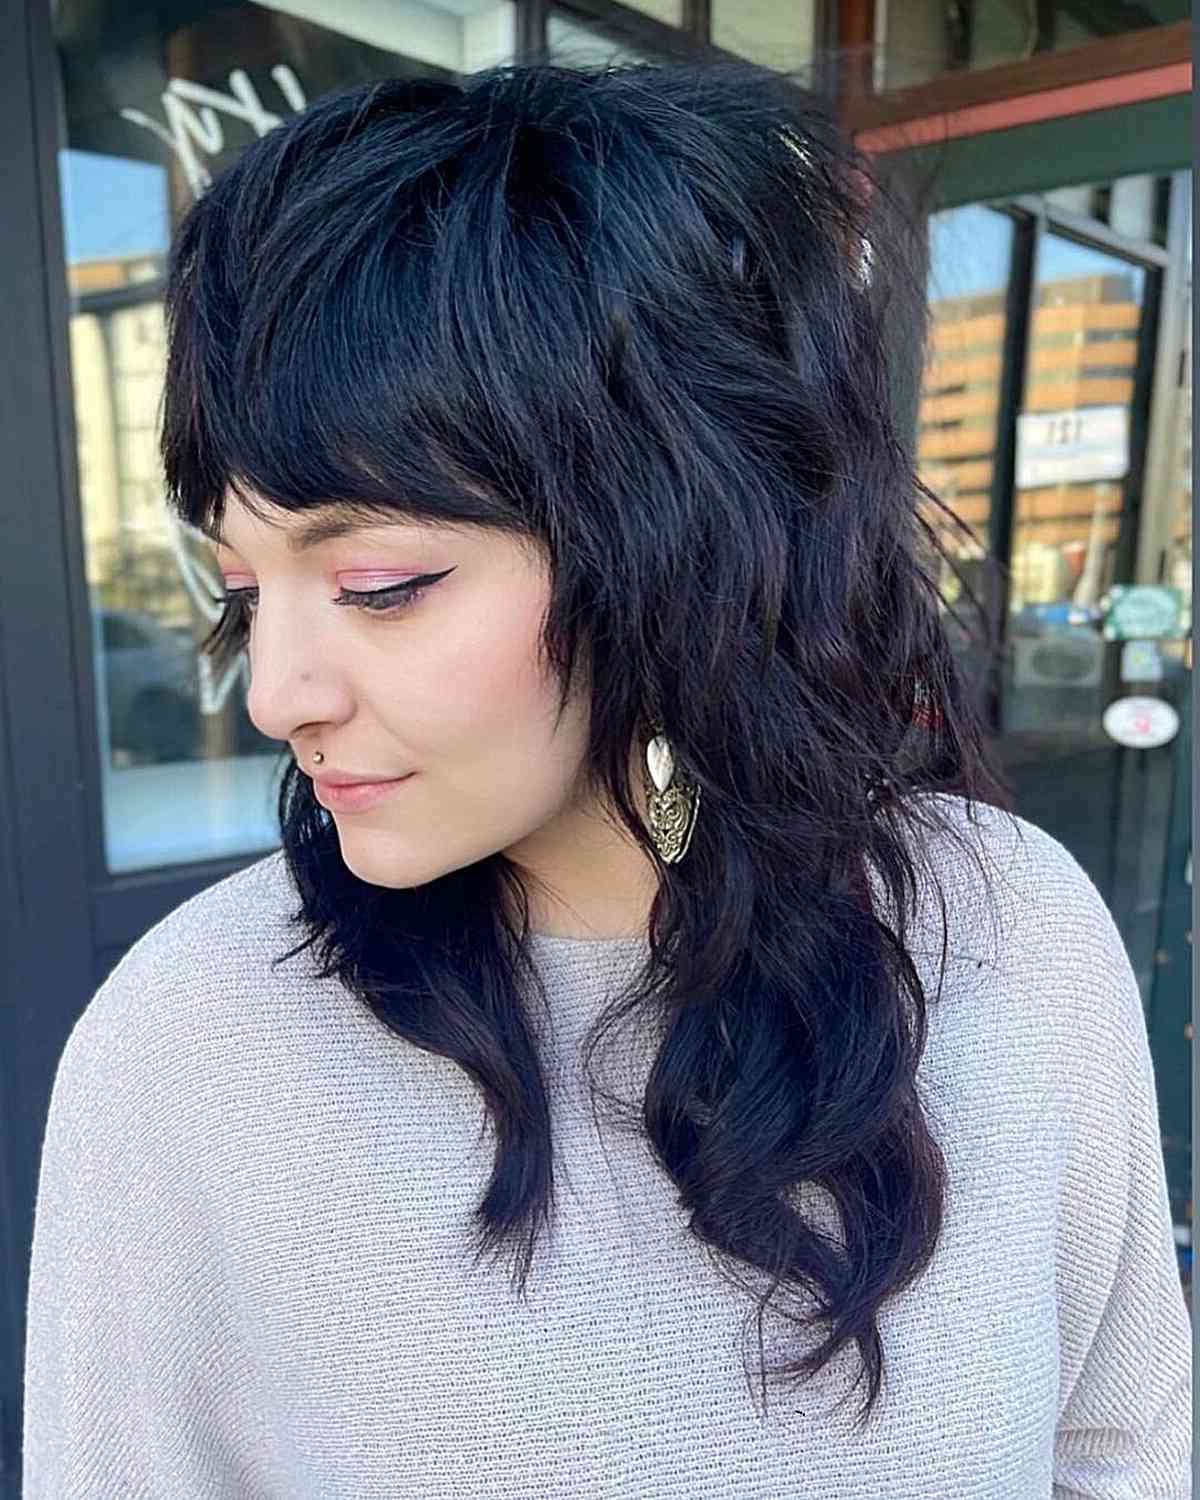 Most Up To Date Medium Shaggy Black Hair With Bangs Regarding 90 Chic Medium Shag Haircuts With Bangs For An On Trend Style (View 3 of 15)